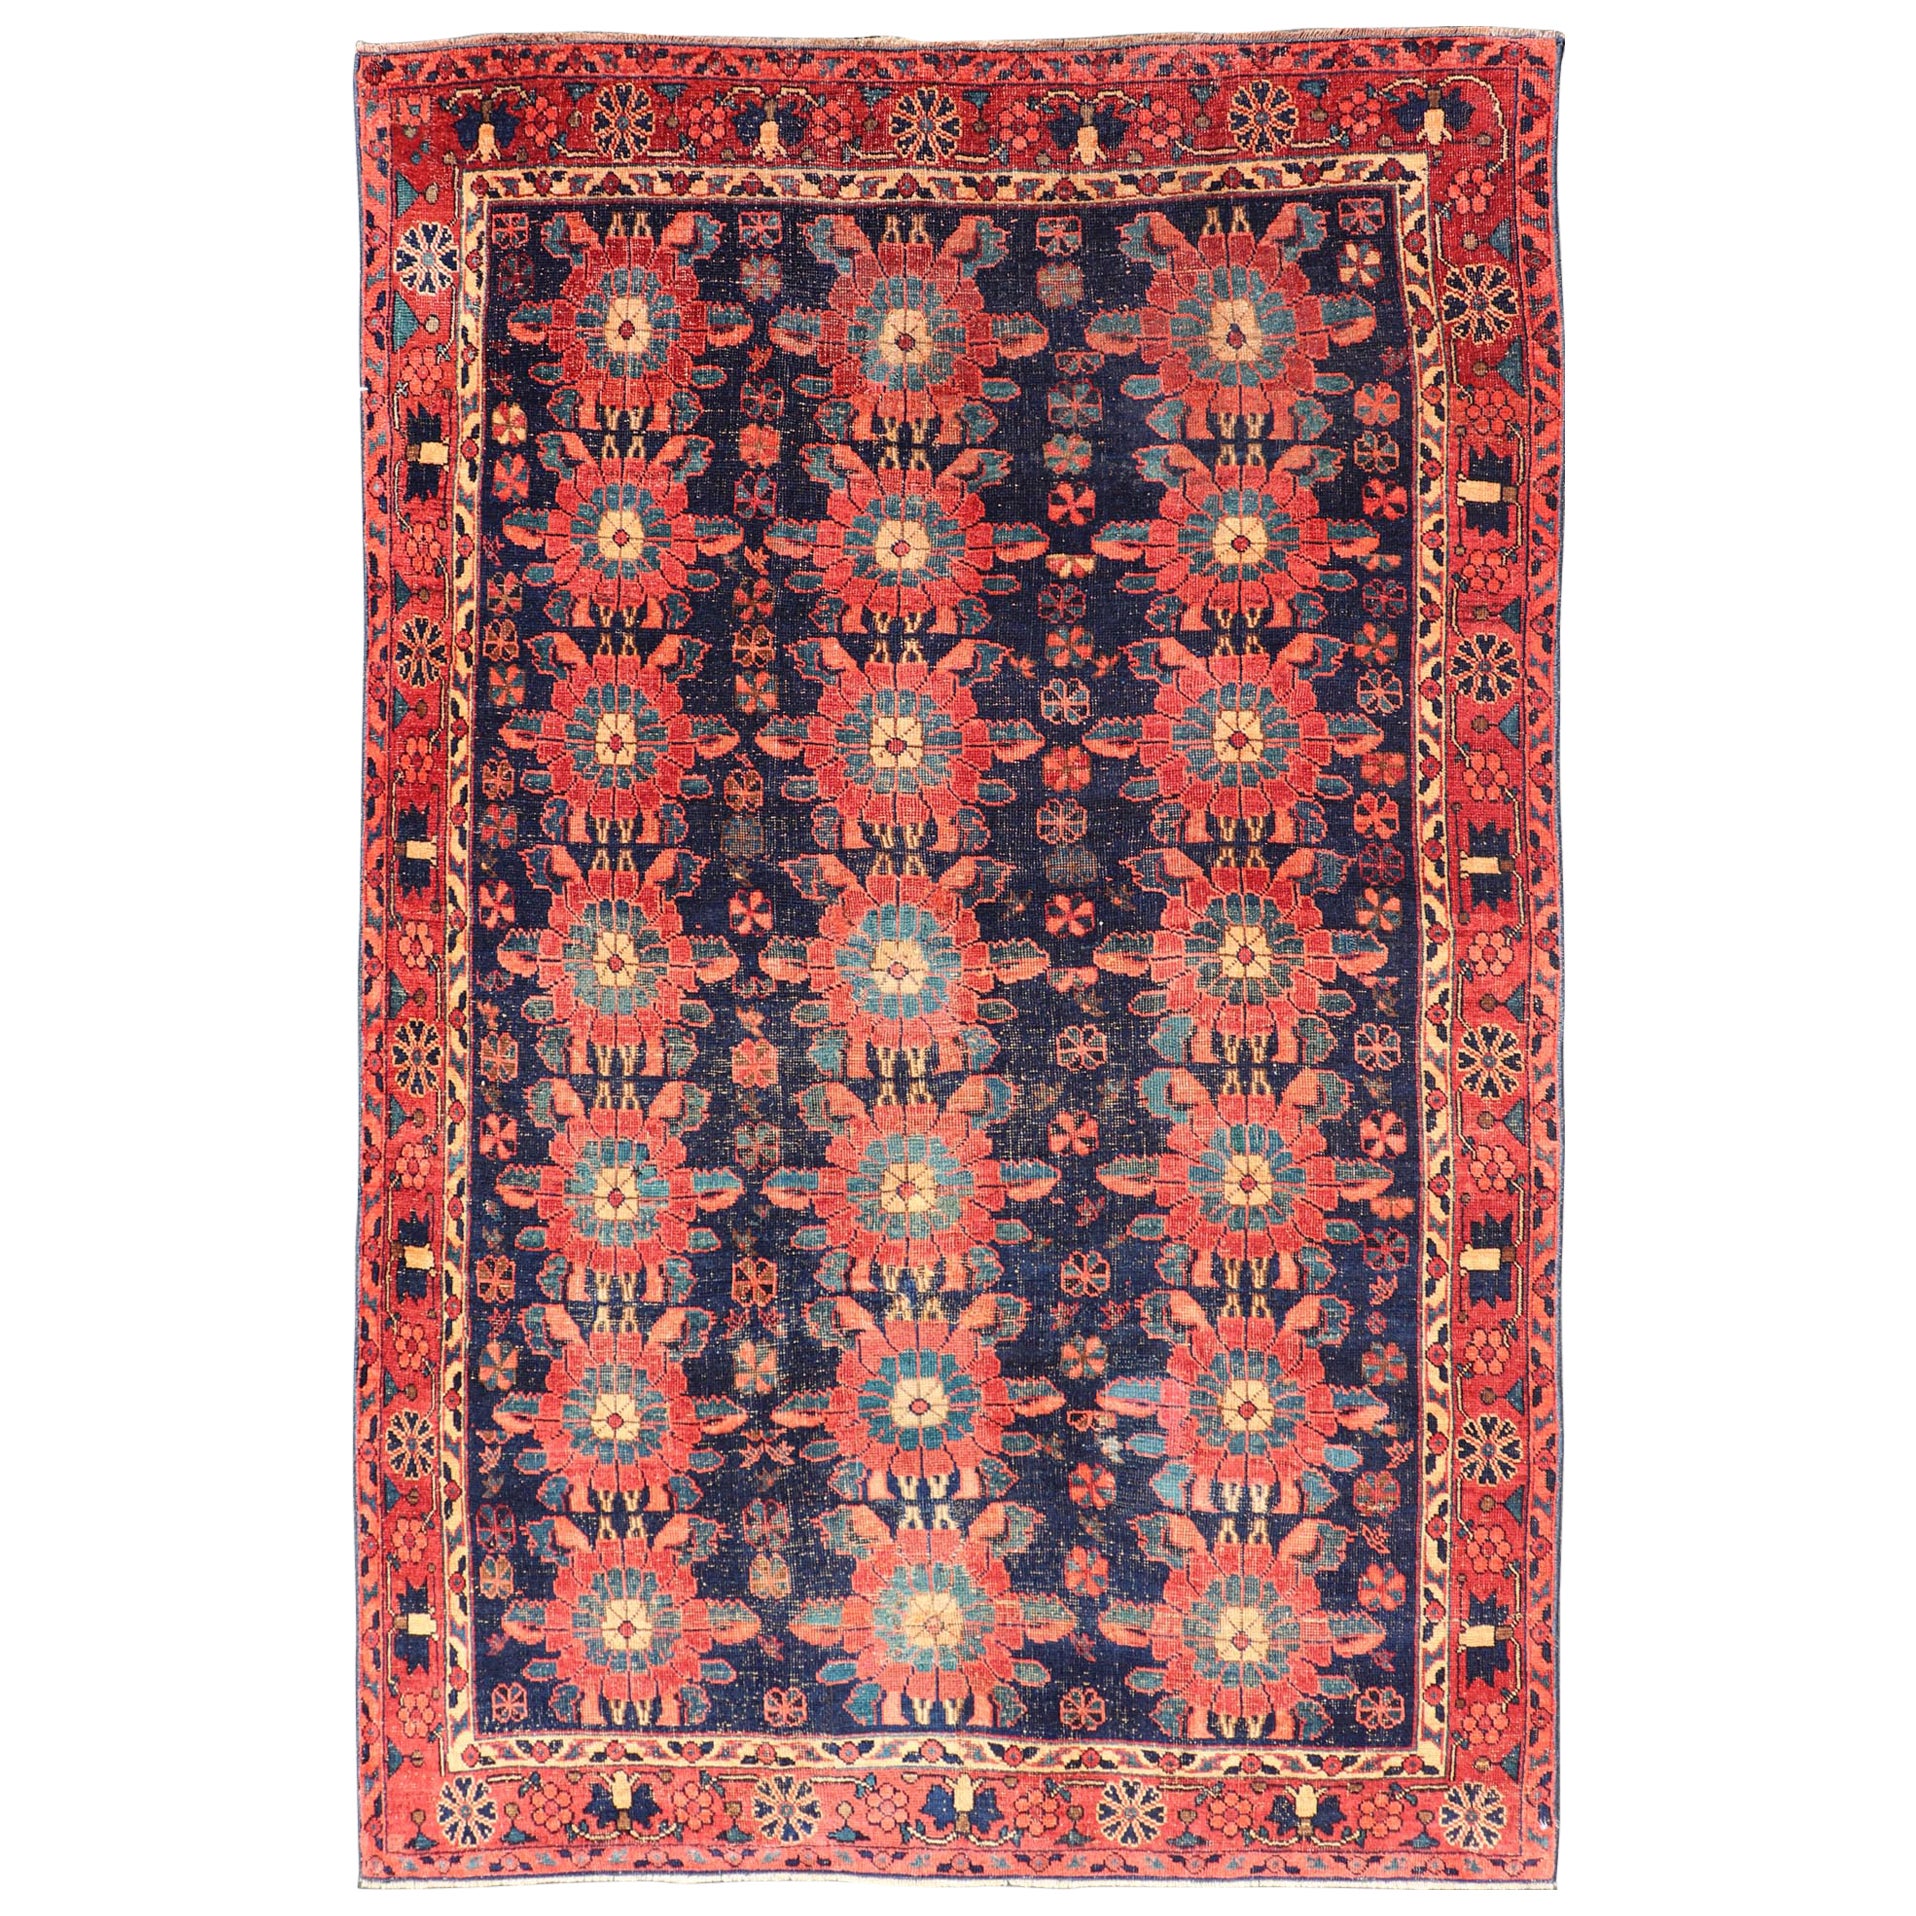 Antique Persian Bidjar Rug with All-Over Floral Motifs in Red and Blue